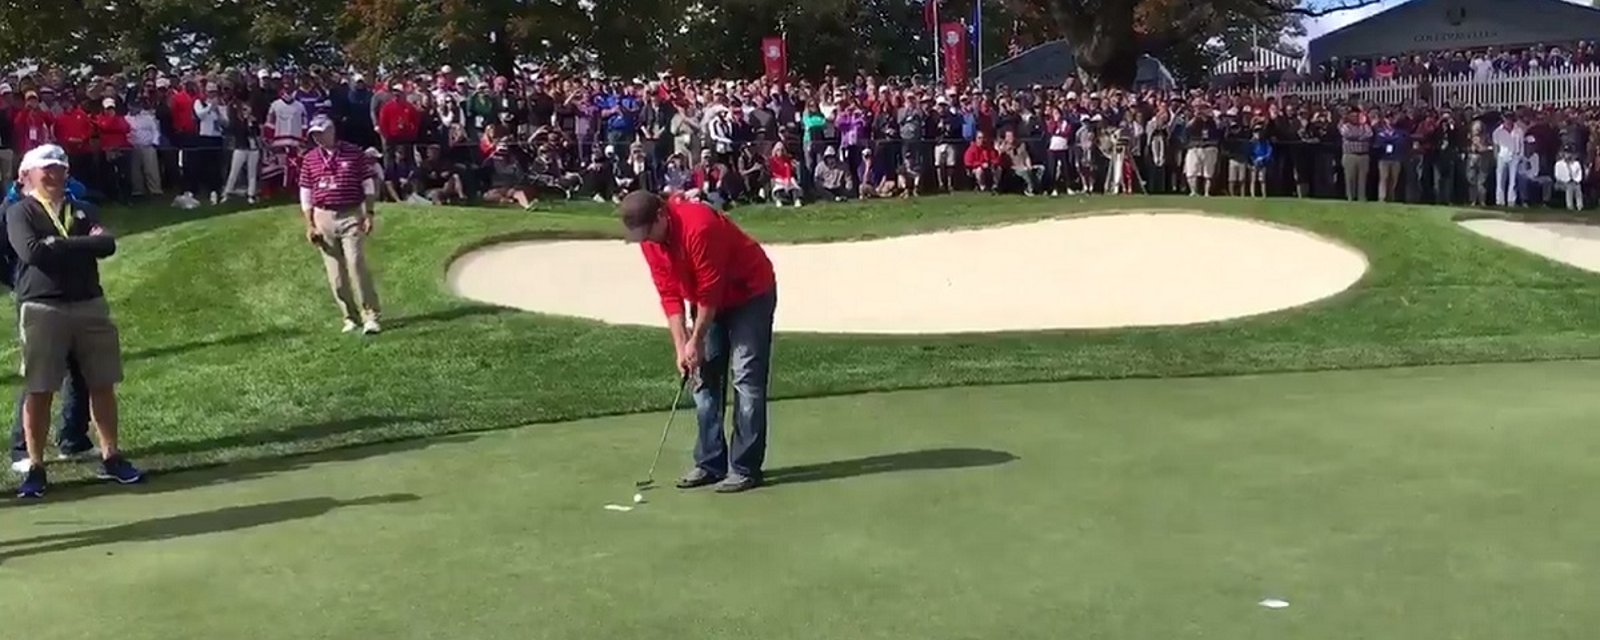 Fan taunts players at the Ryder Cup, gets challenged to a bet, and does the incredible!